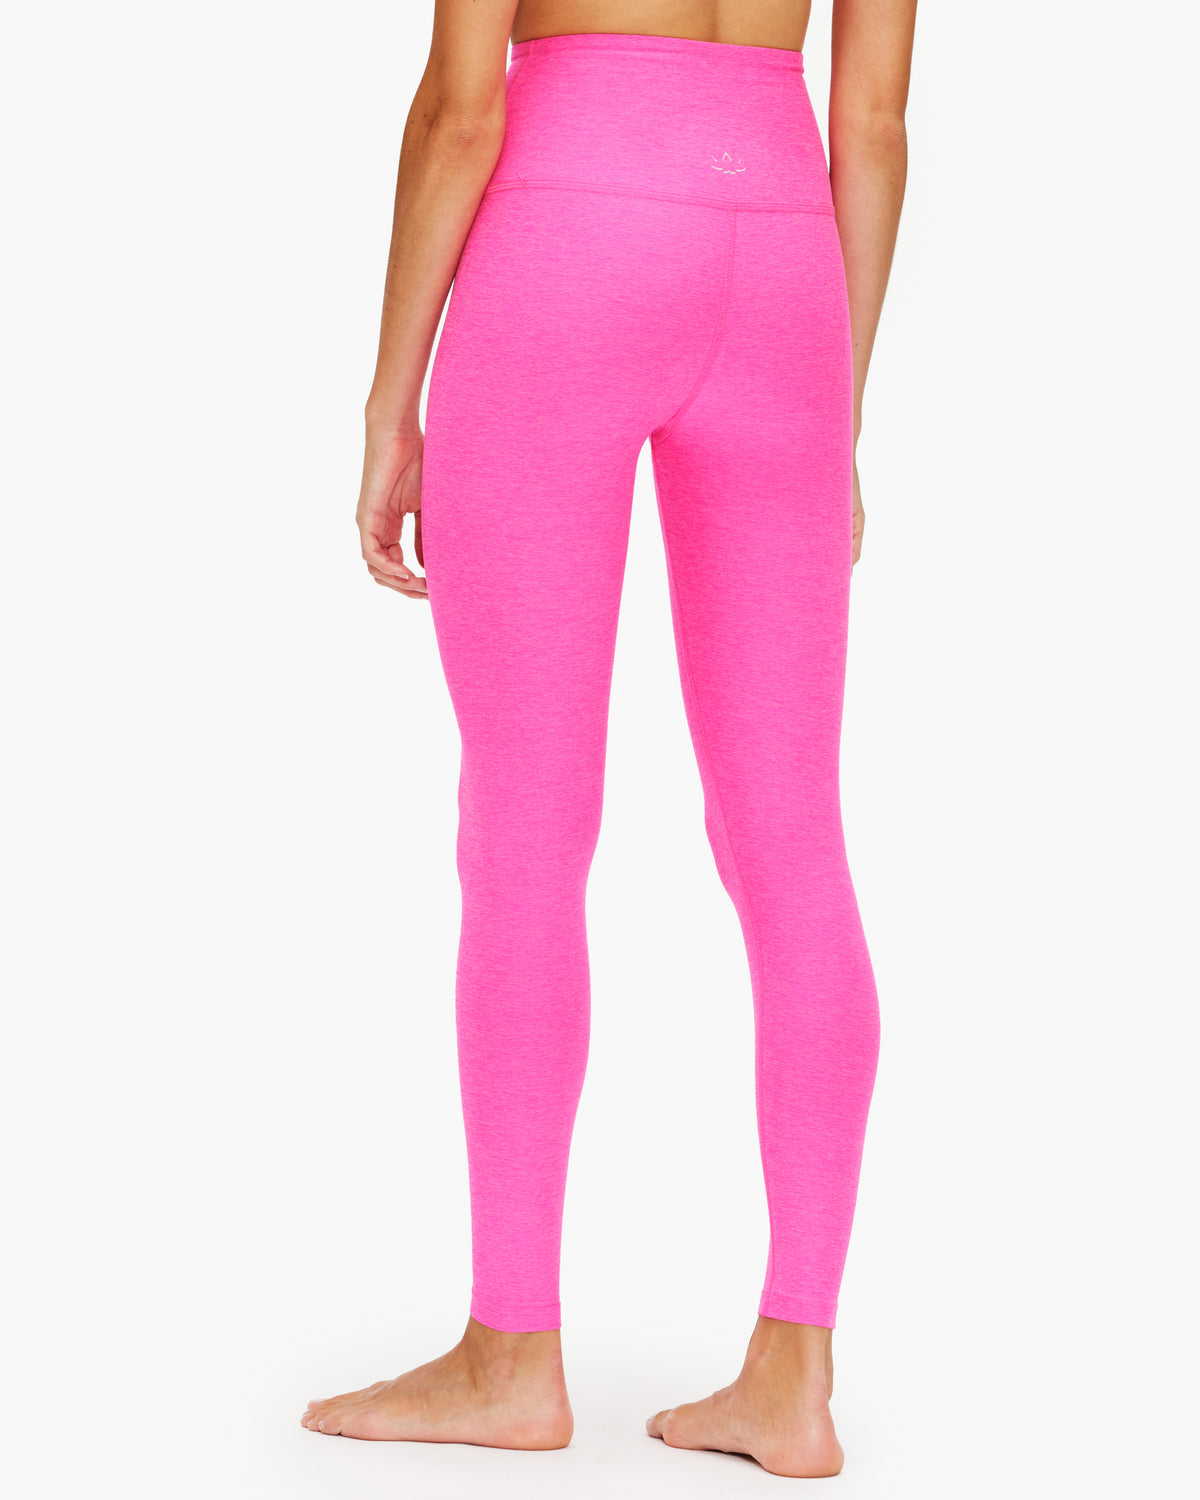 Beyond Yoga Spacedye Caught In The Midi High Waisted Legging in Magenta  Heather